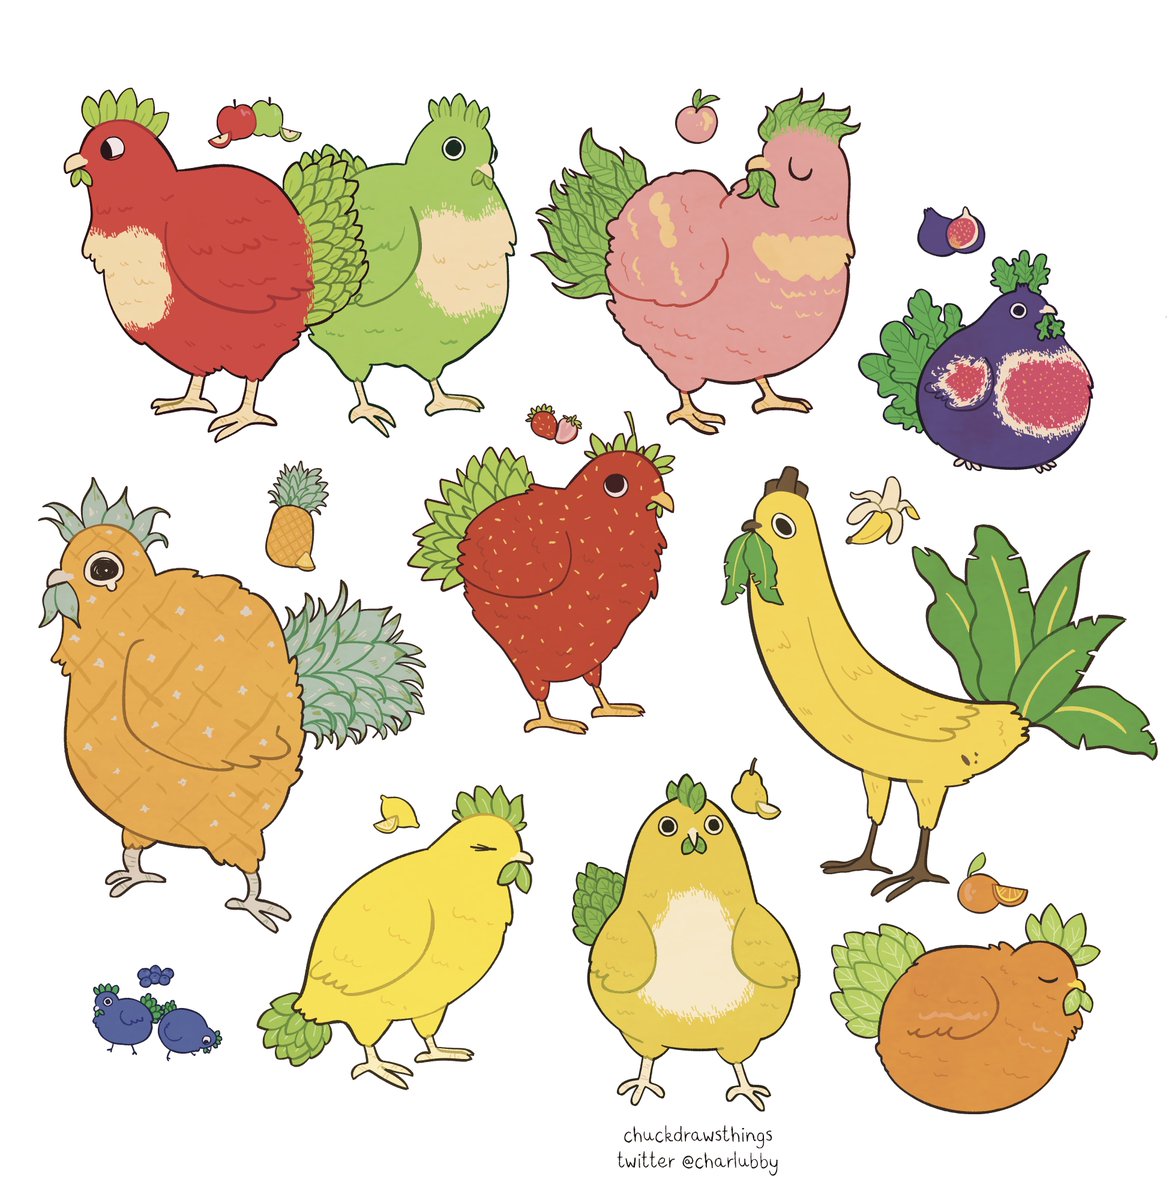 「fruit-laying chickens」|chuck ❄️のイラスト